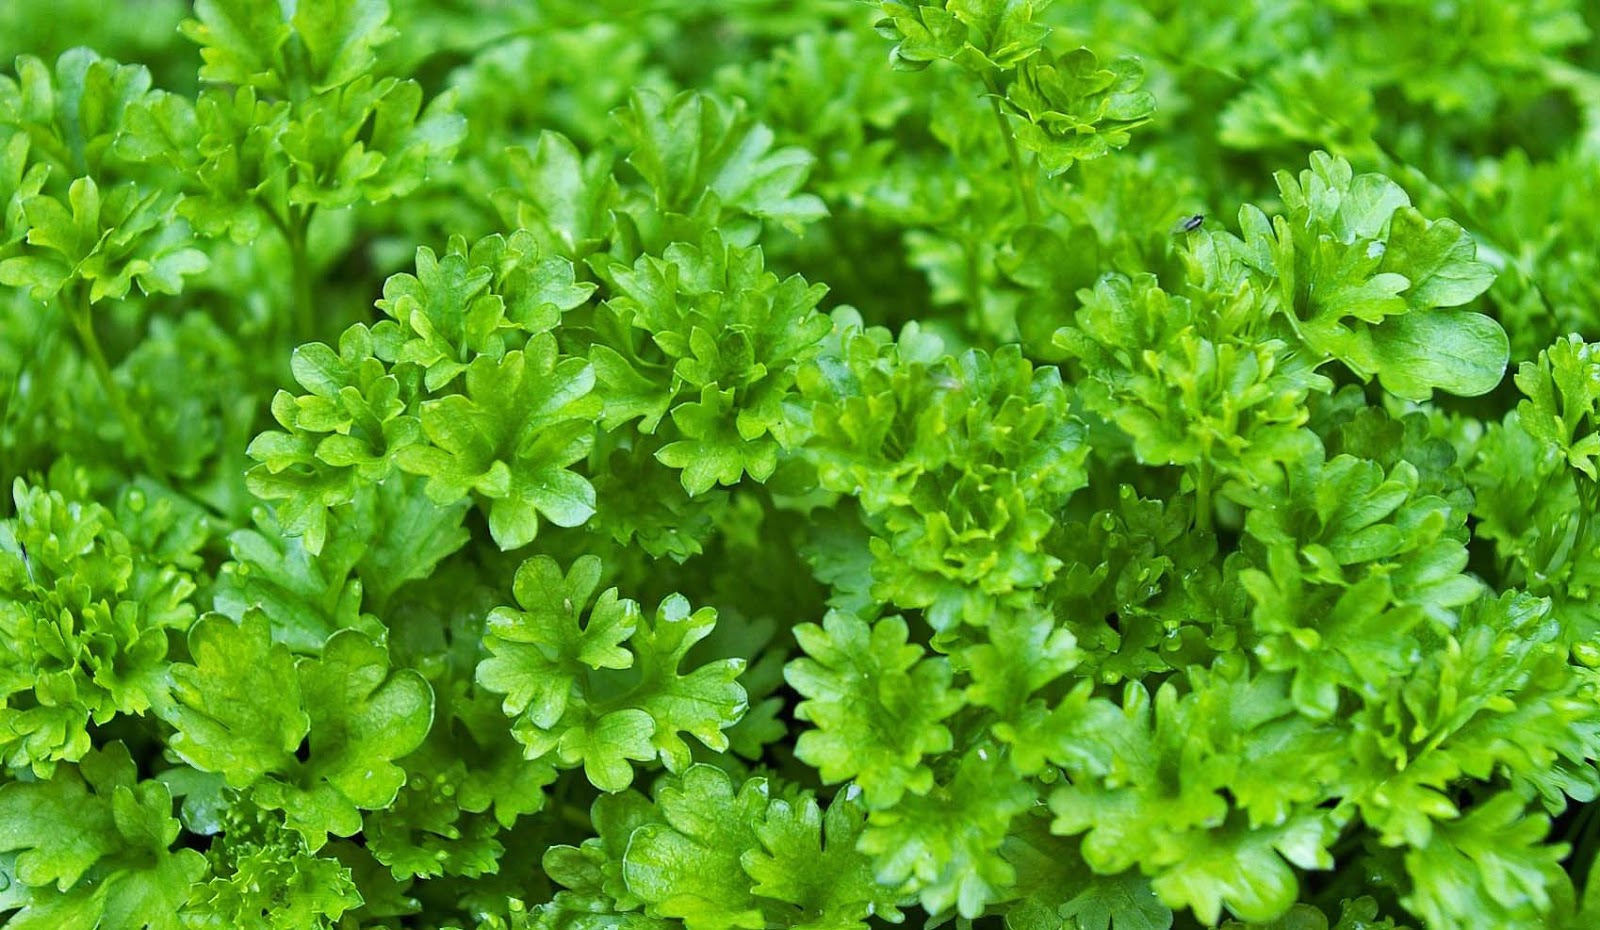 Culinary Physics Cilantro Taste Why Coriander Cilantro Tastes Like Metal Or Soap To Some People